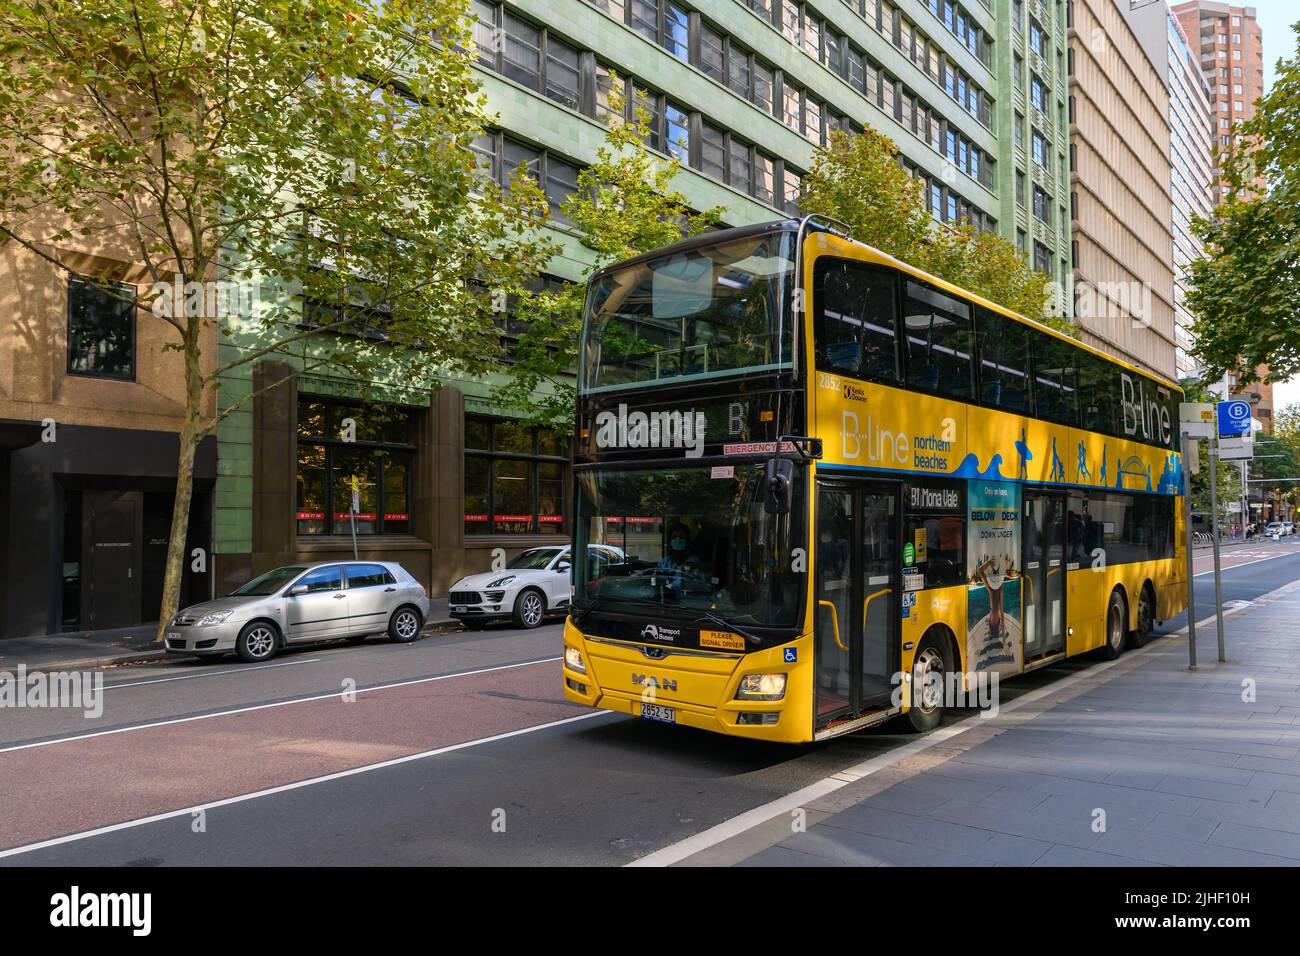 Sydney, Australia - April 16, 2022: Mona Vale B-Line double decker bus stopped on the bus stop in Sydney city on a day Stock Photo